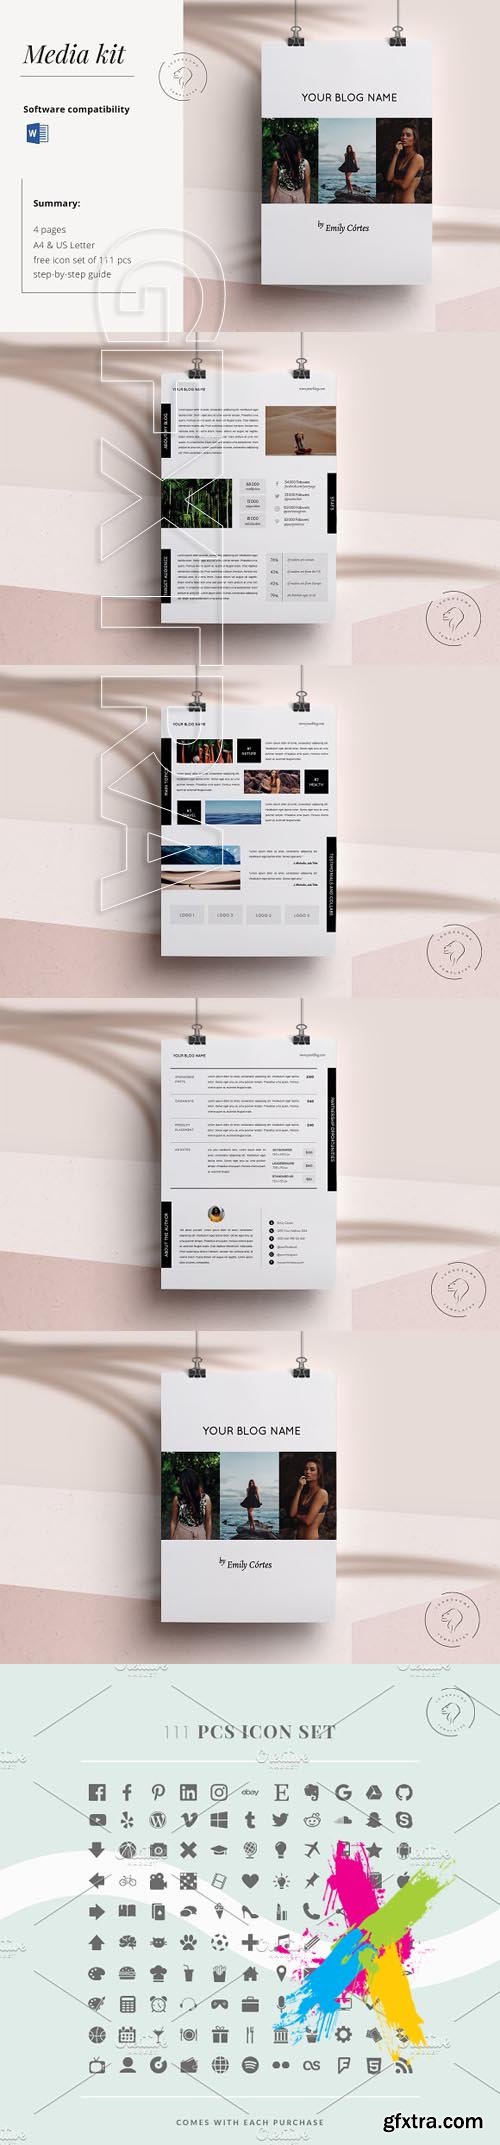 CM - Media Kit Template 4 Pages 1705464